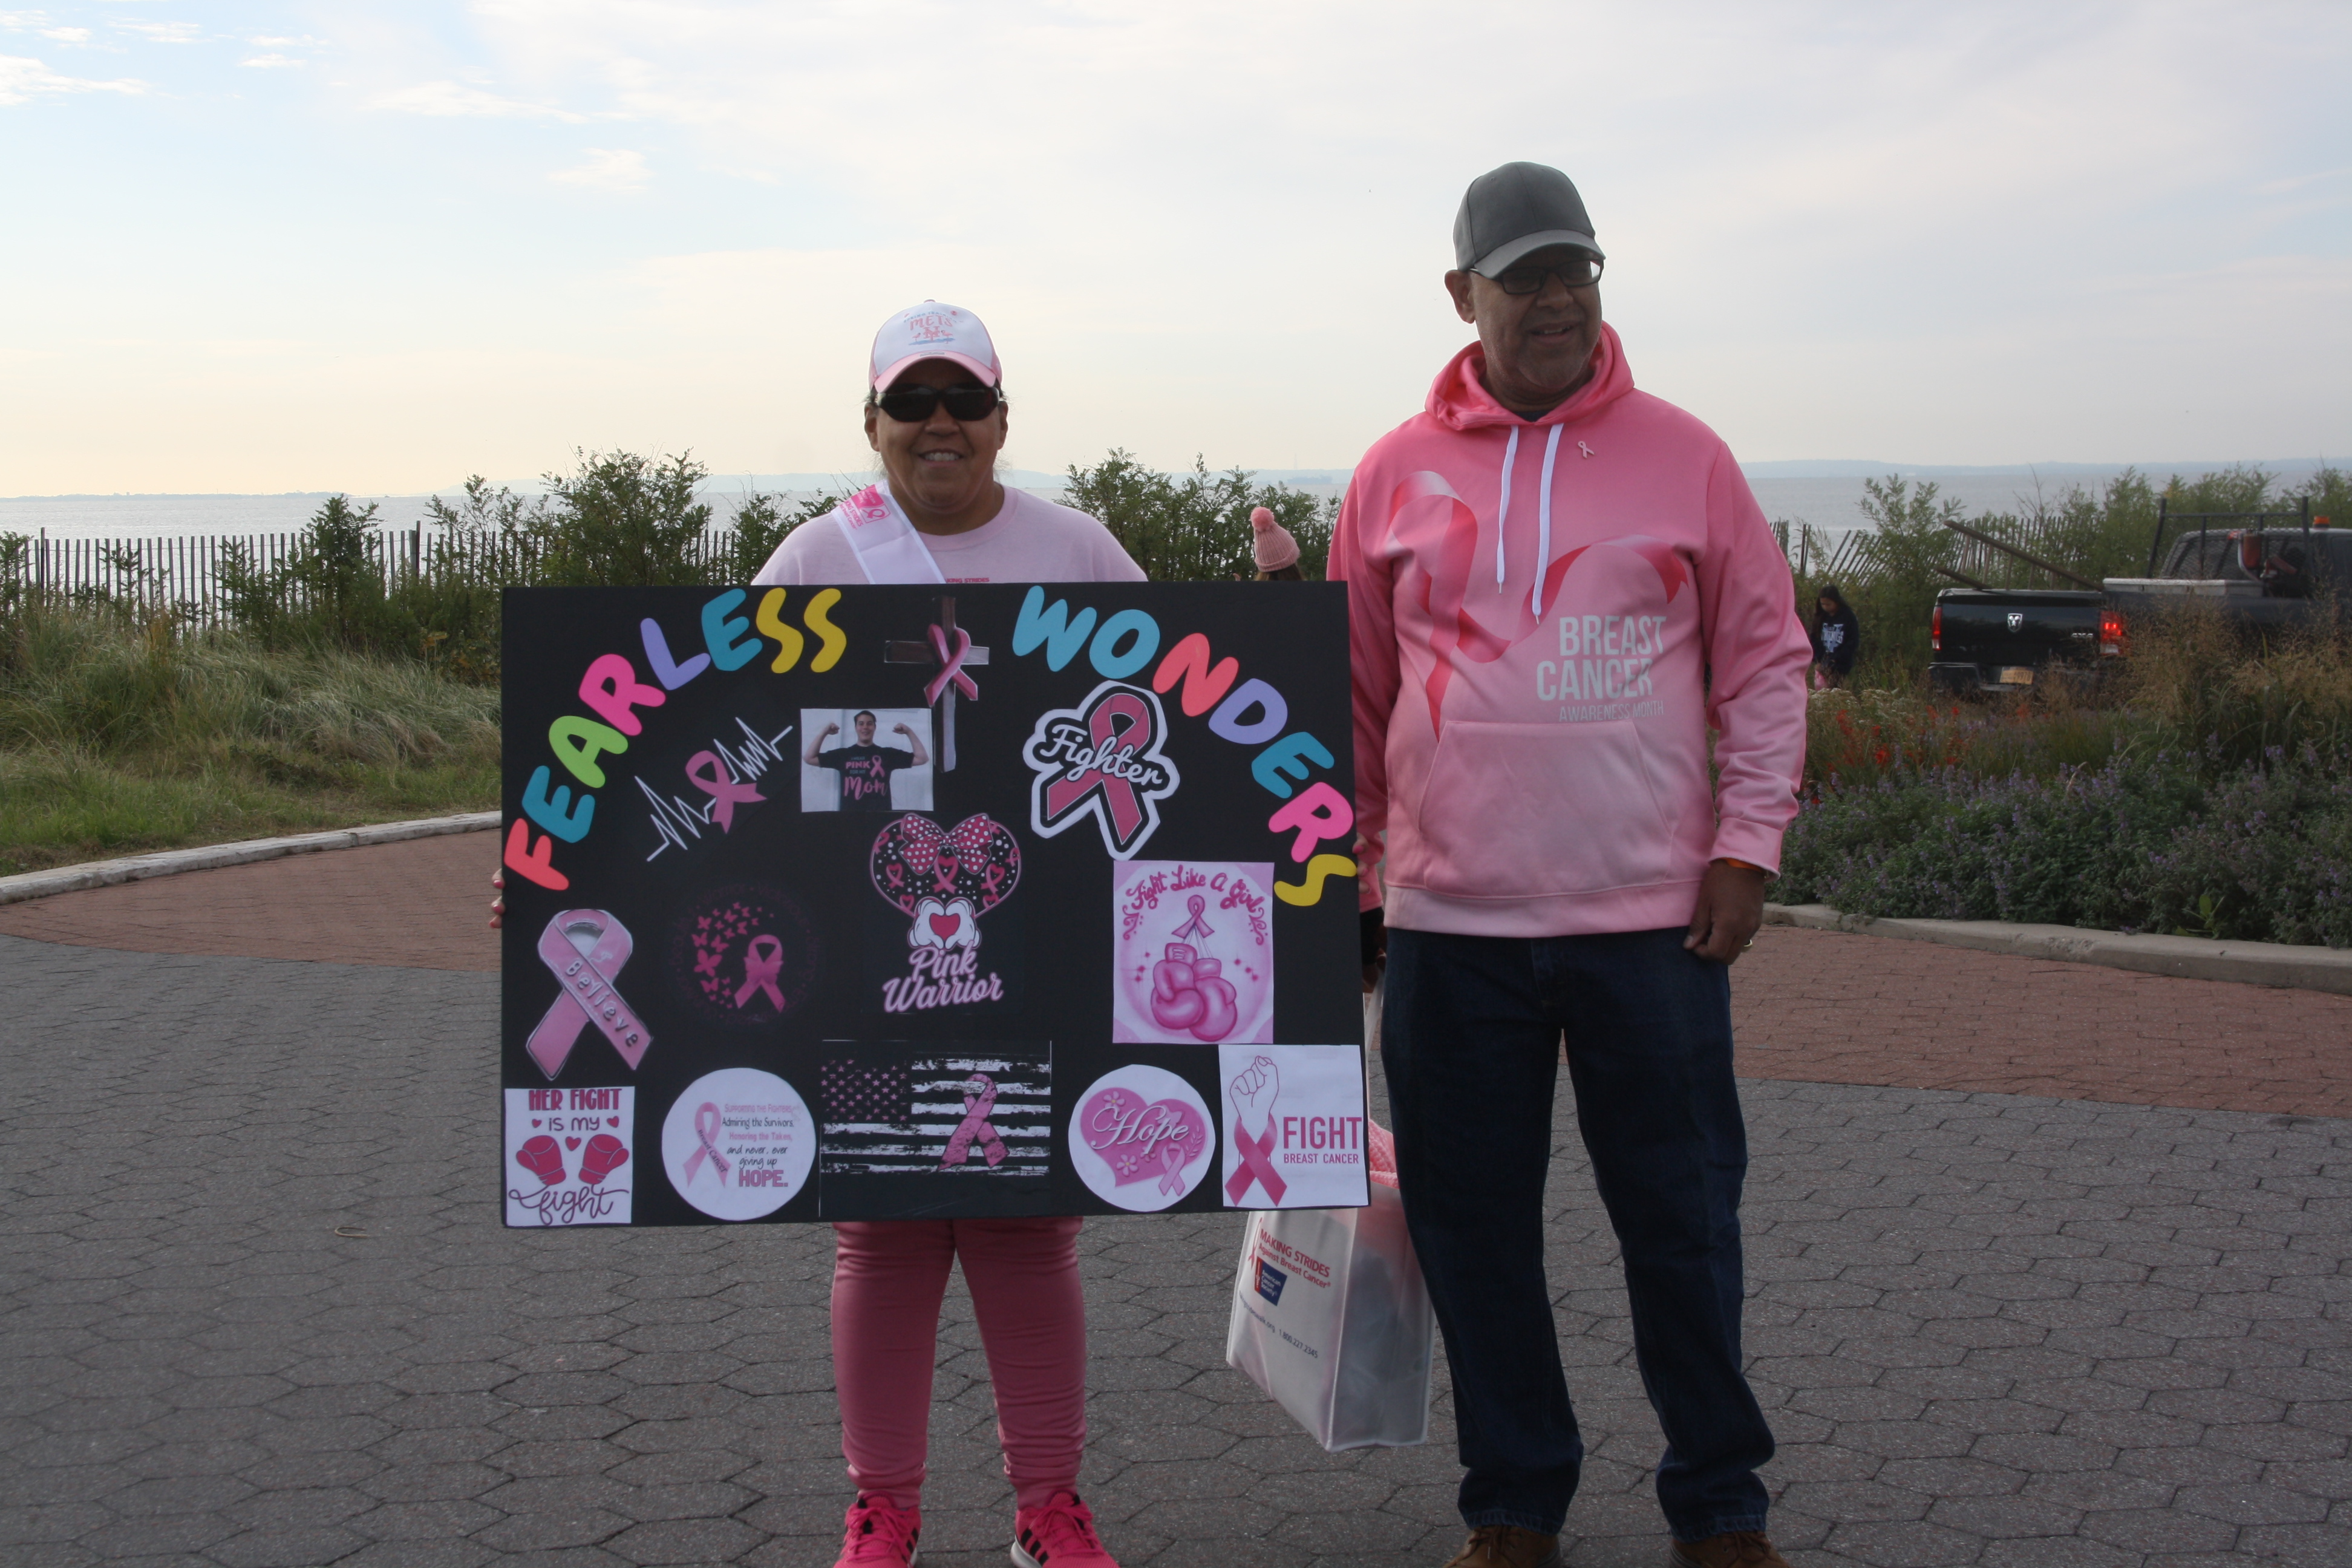 Making strides Peers in pink ready to roll to fight breast cancer